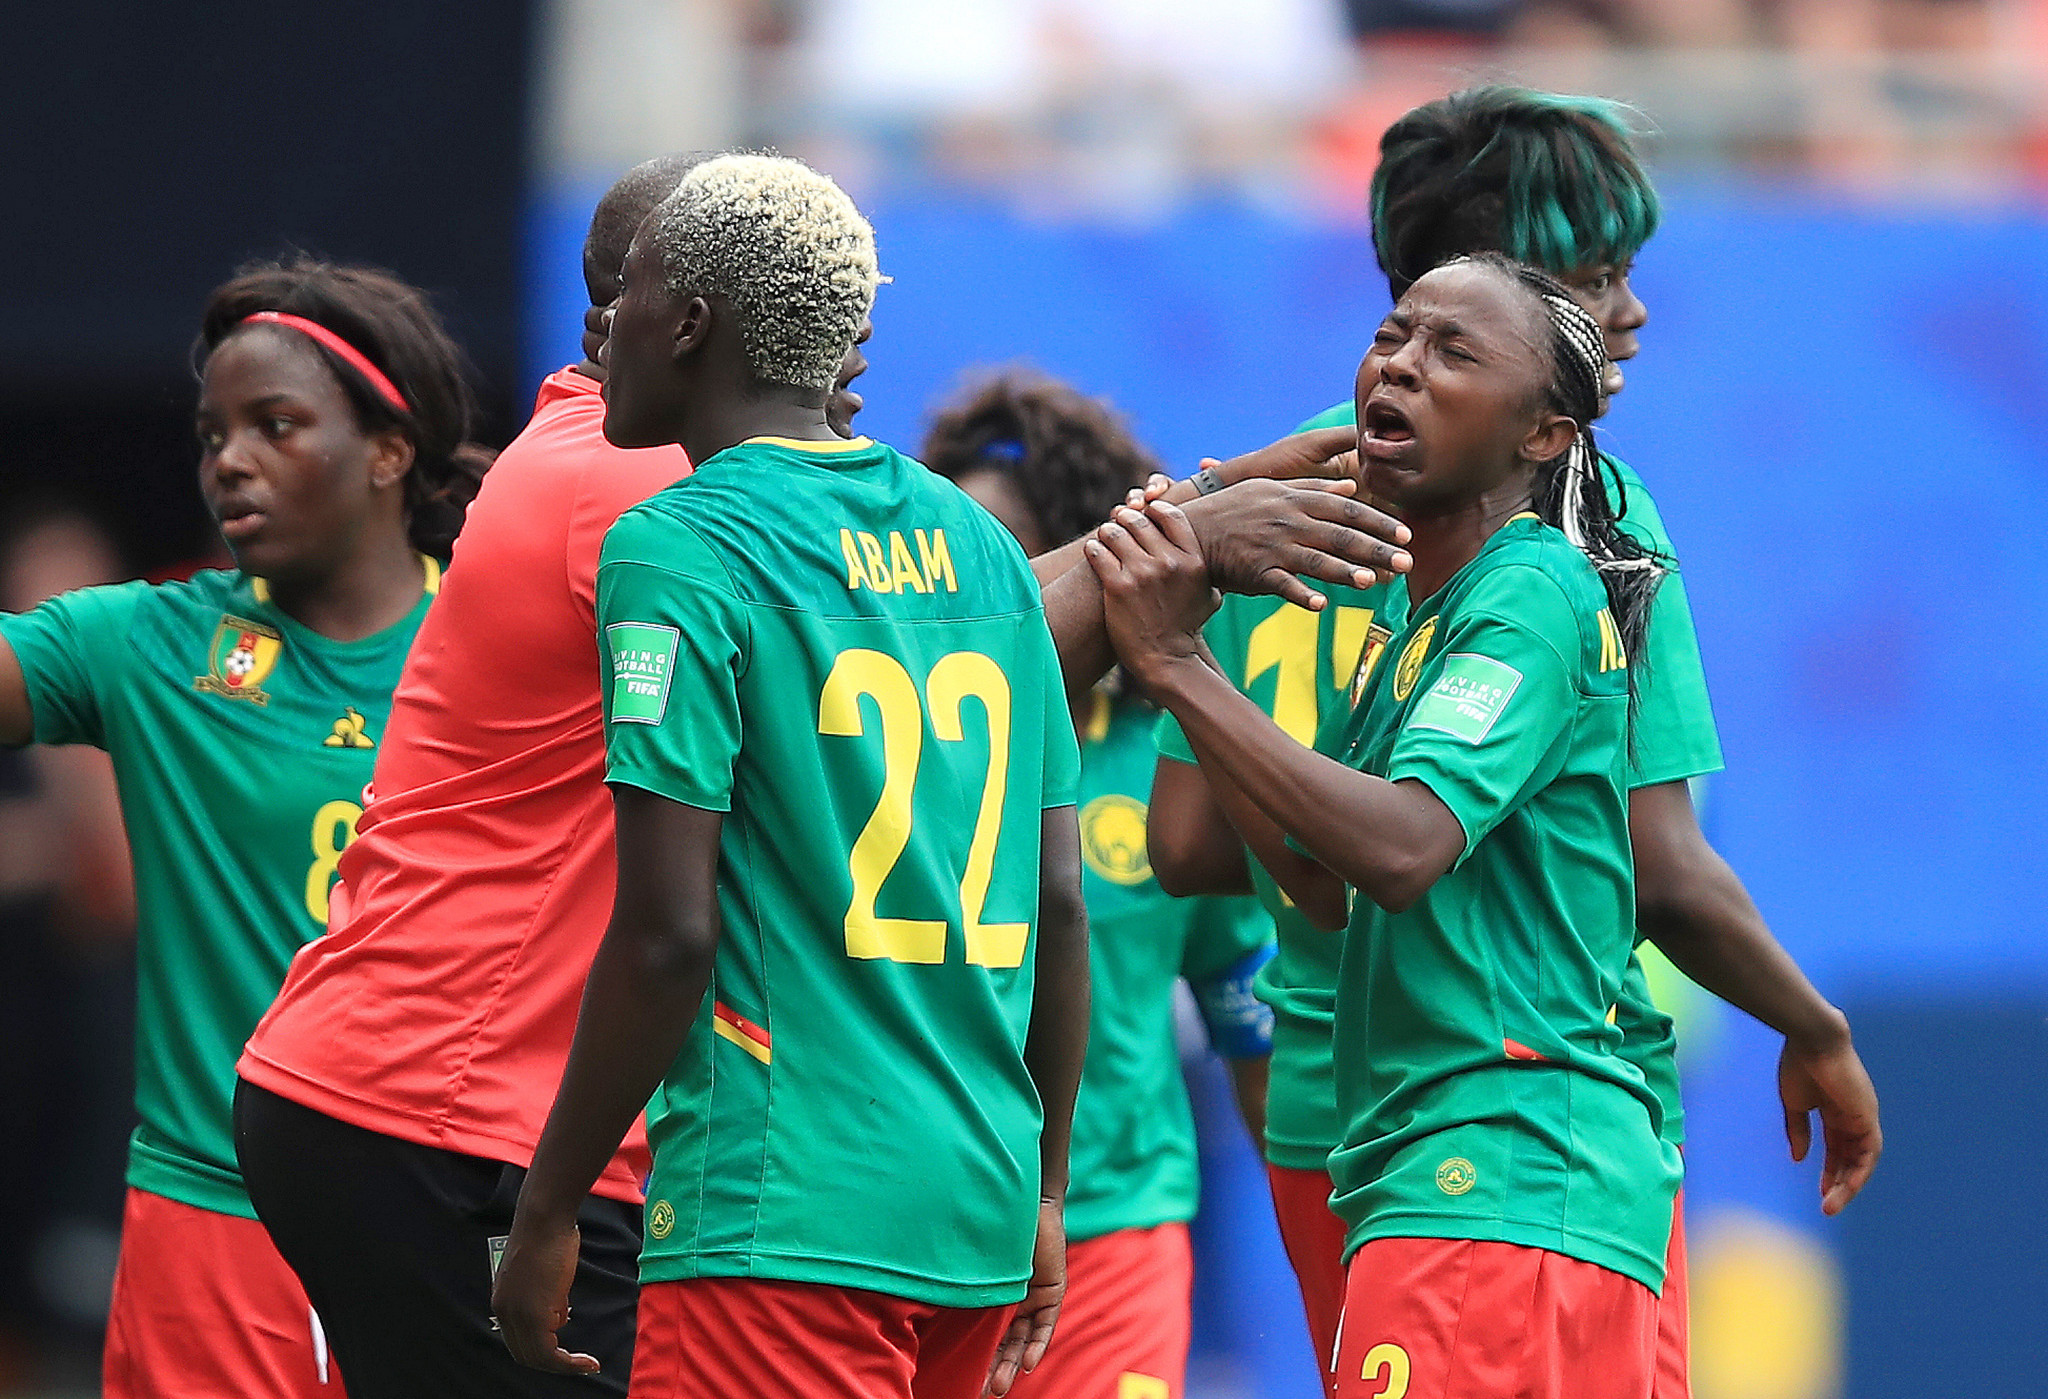 Ajara Nchout was in tears after another VAR decision went against Cameroon, ruling out her goal just after half time ©Getty Images